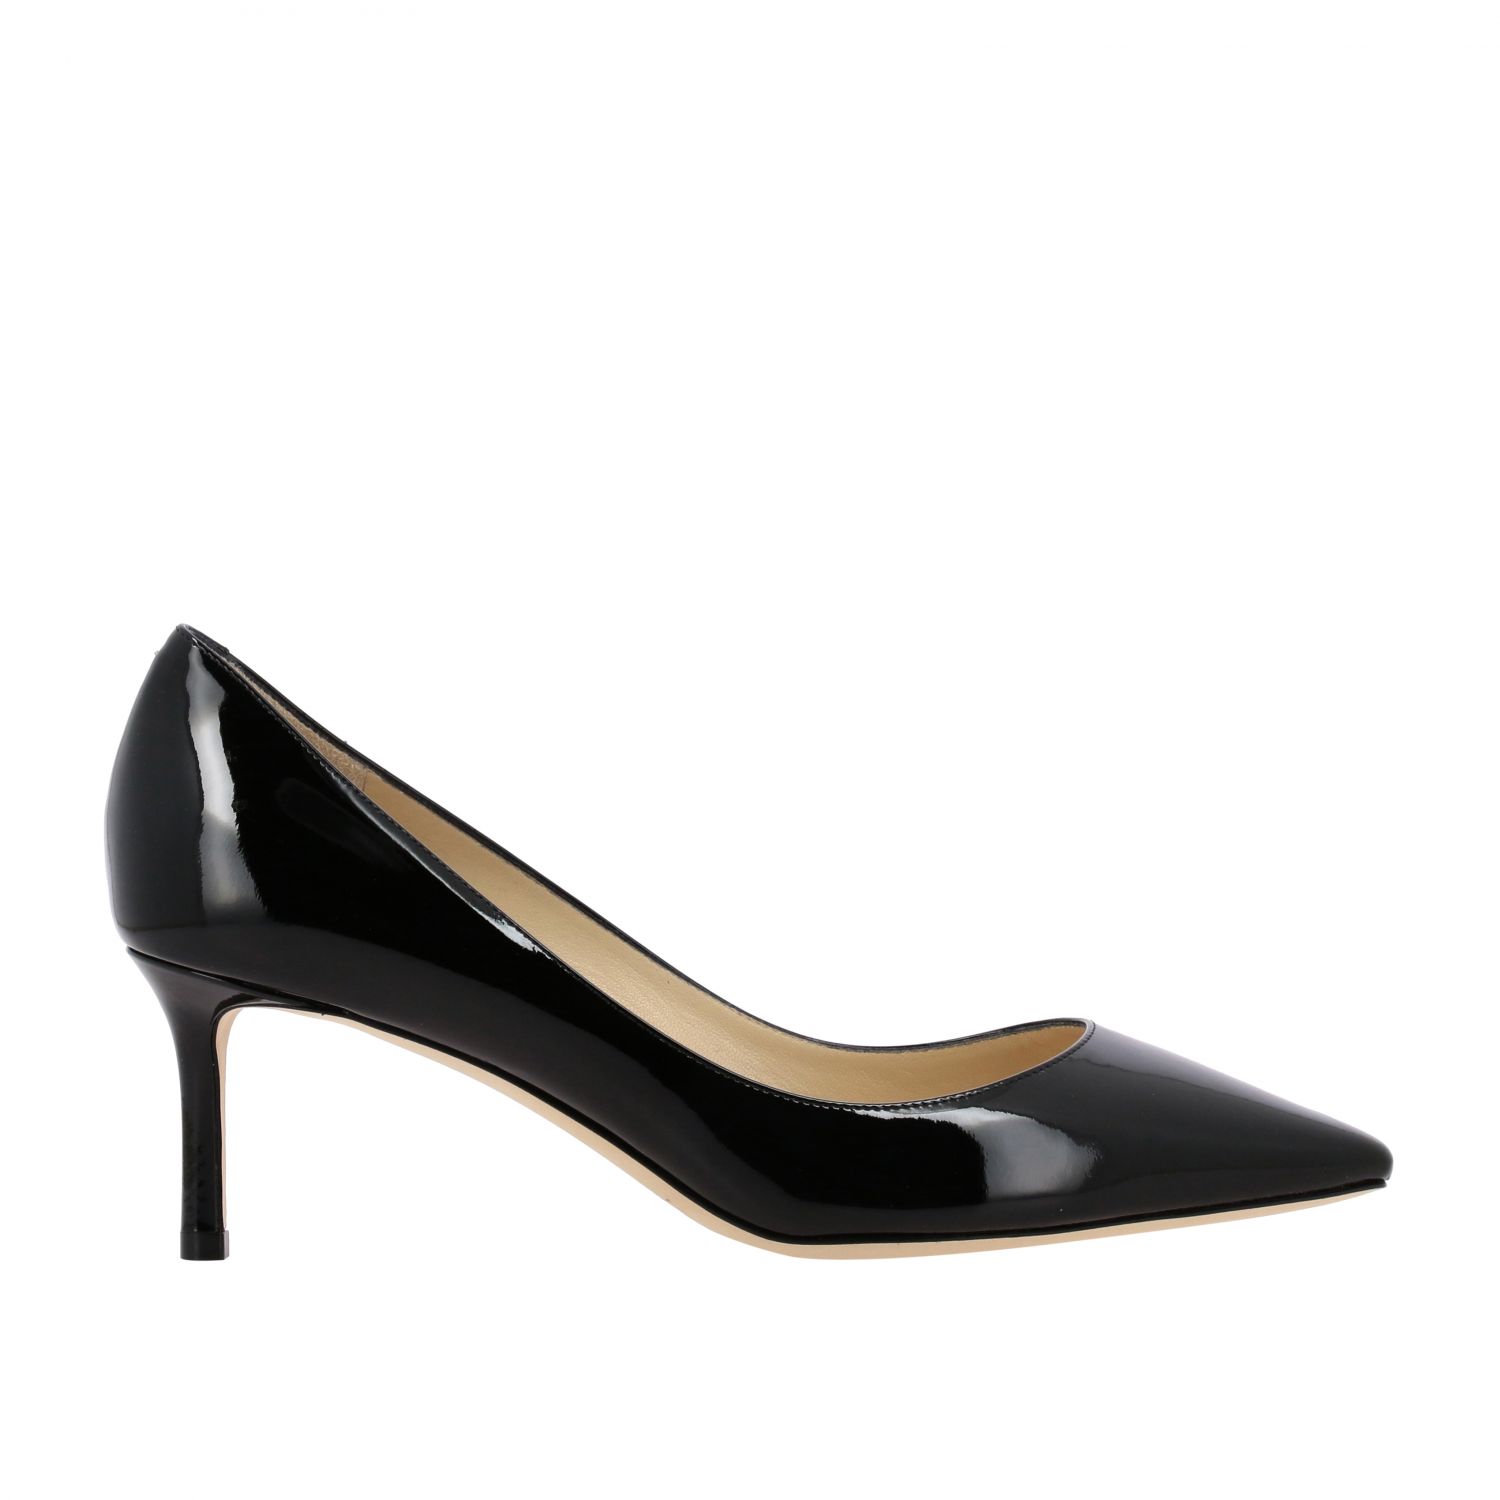 Jimmy Choo Outlet: Romy pumps in patent leather - Black | Jimmy Choo ...